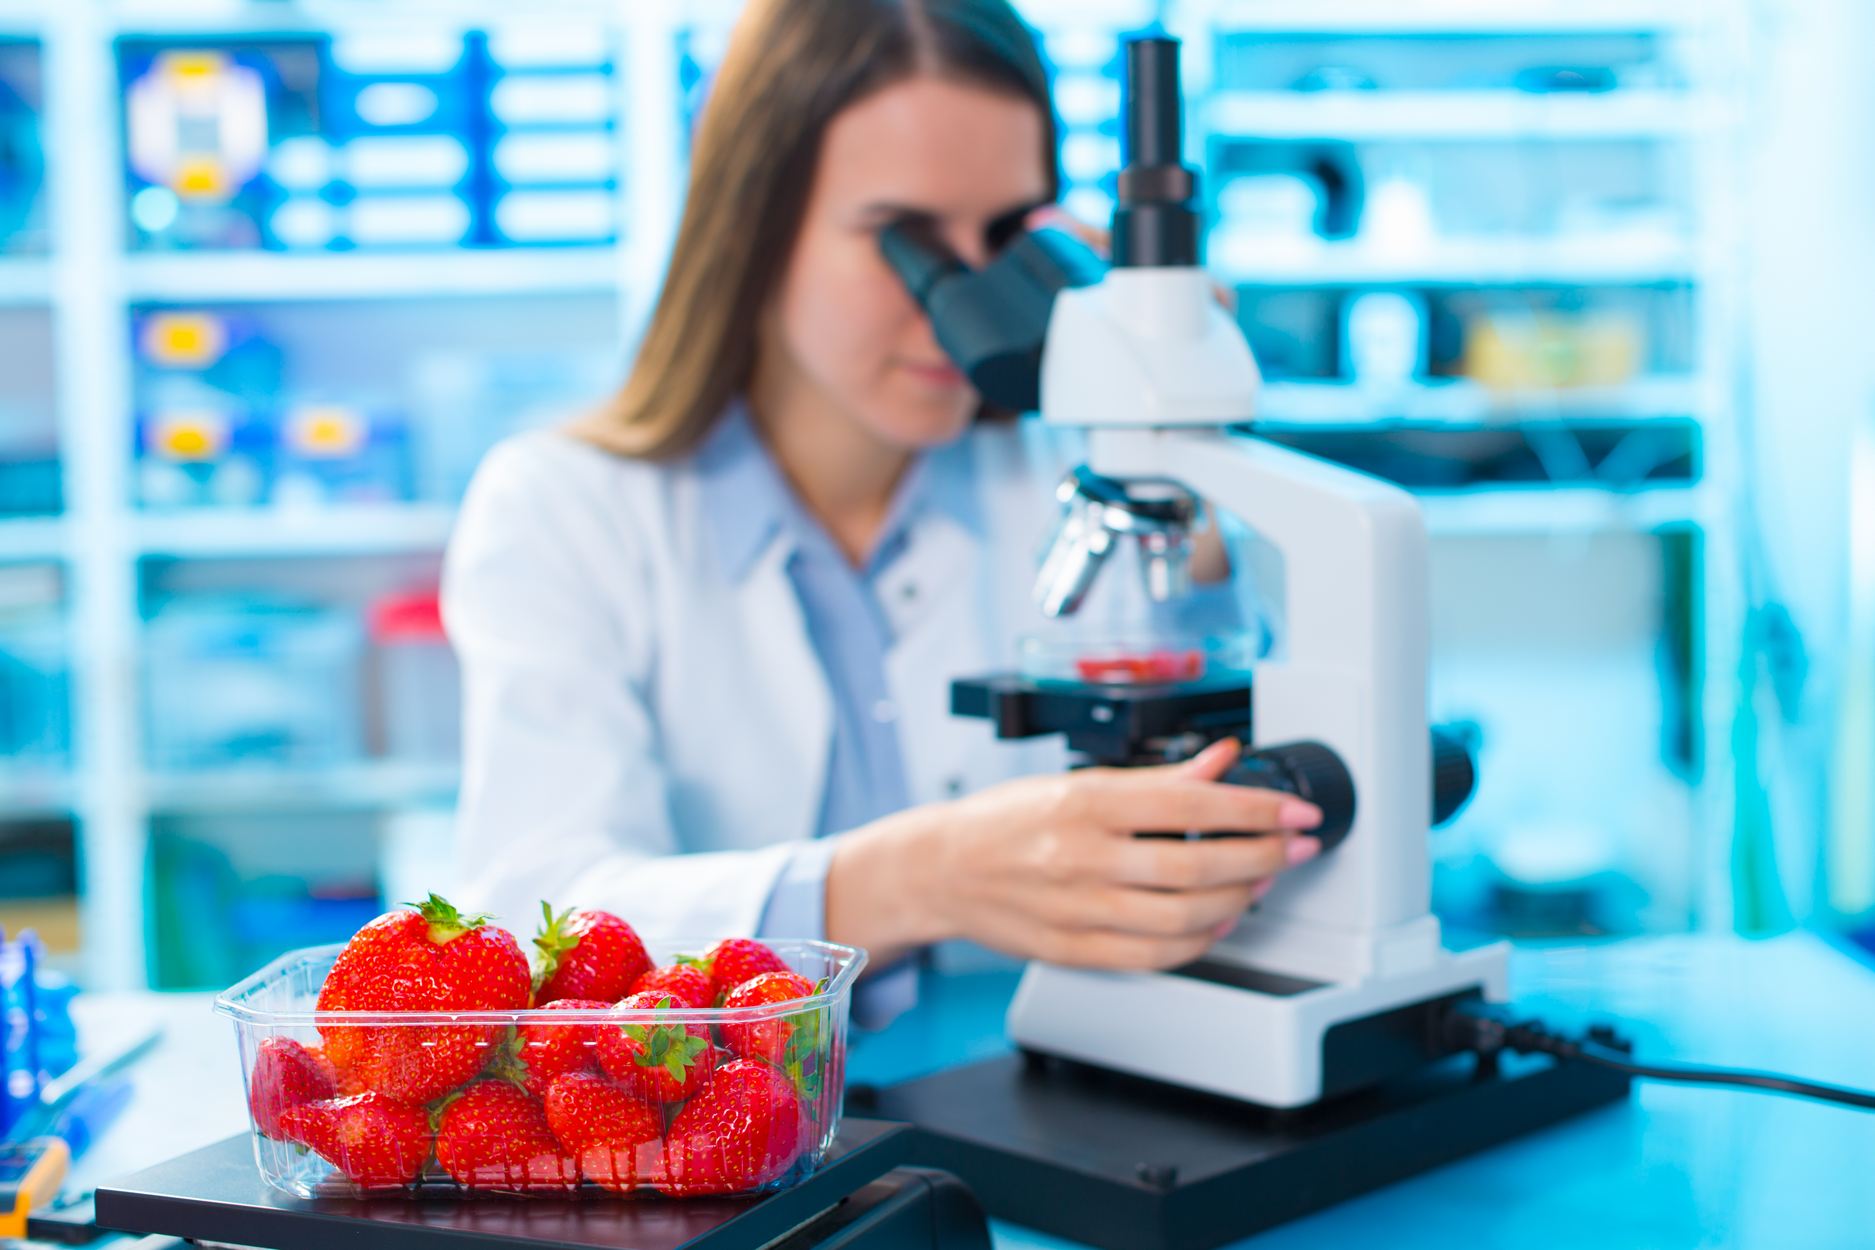 Female scientist checking strawberries for pesticides